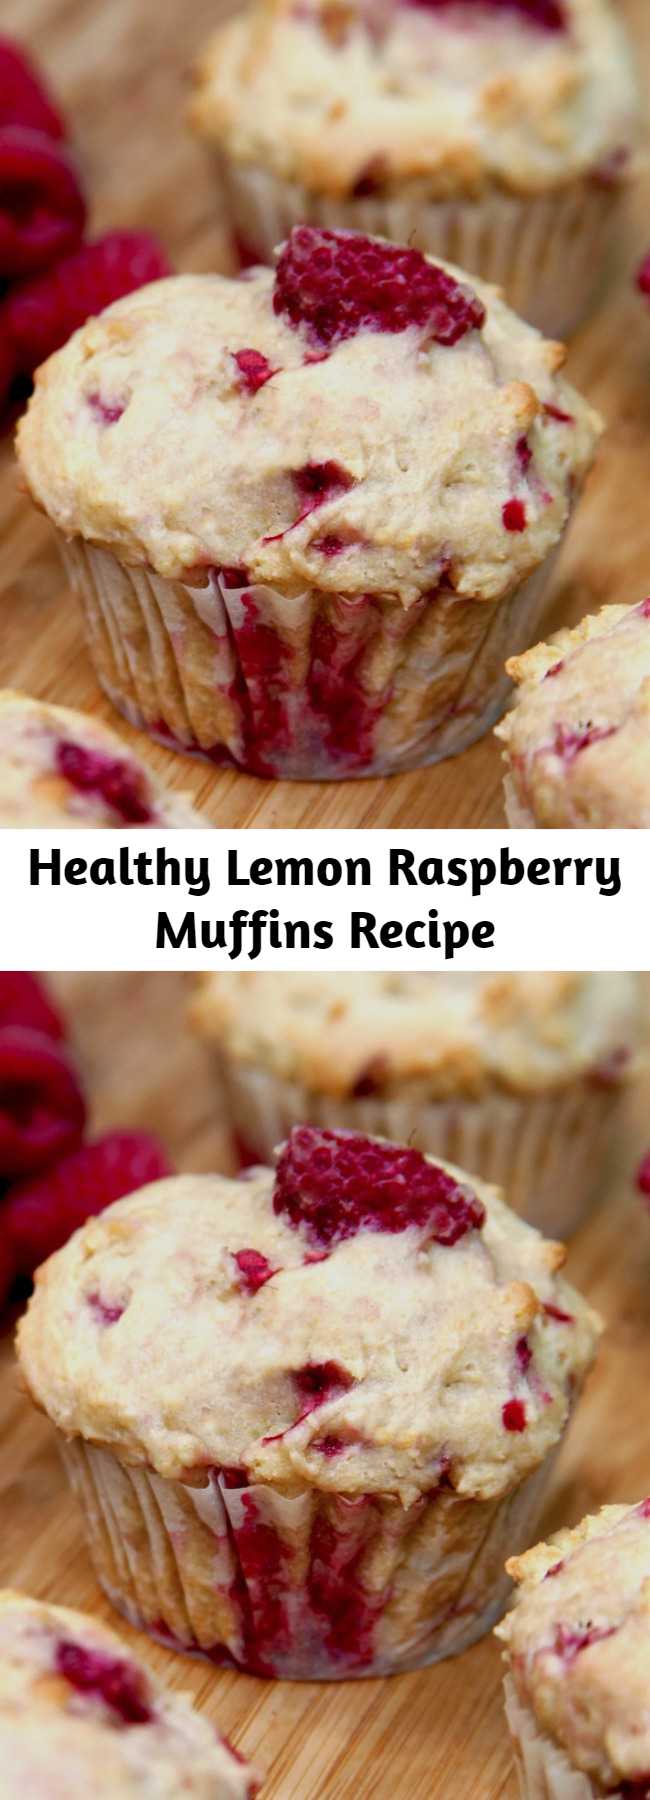 Healthy Lemon Raspberry Muffins Recipe - Berries are finally in season! Pick up a pint, and make these moist and naturally sweet muffins. Made with Greek yogurt instead of buttermilk, they're a tasty way to get some protein without all the fat. These are so light and summery, with bursts of juicy raspberries — perfect to grab with your morning smoothie or to bake up for a weekend brunch.